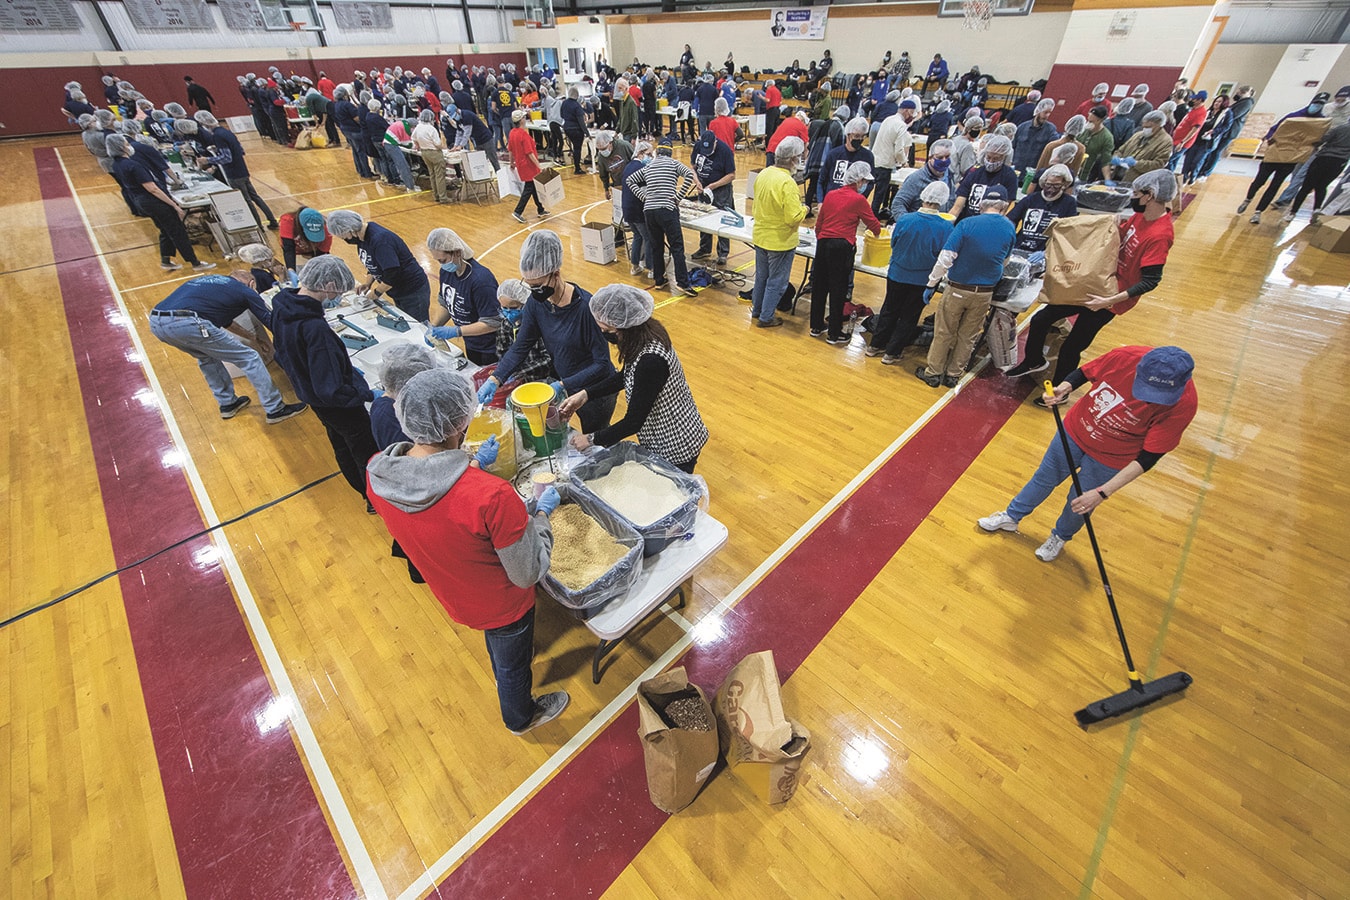 Duke volunteers pack lunches for underserved schoolchildren over the MLK weekend. Photo by Chris Hildreth